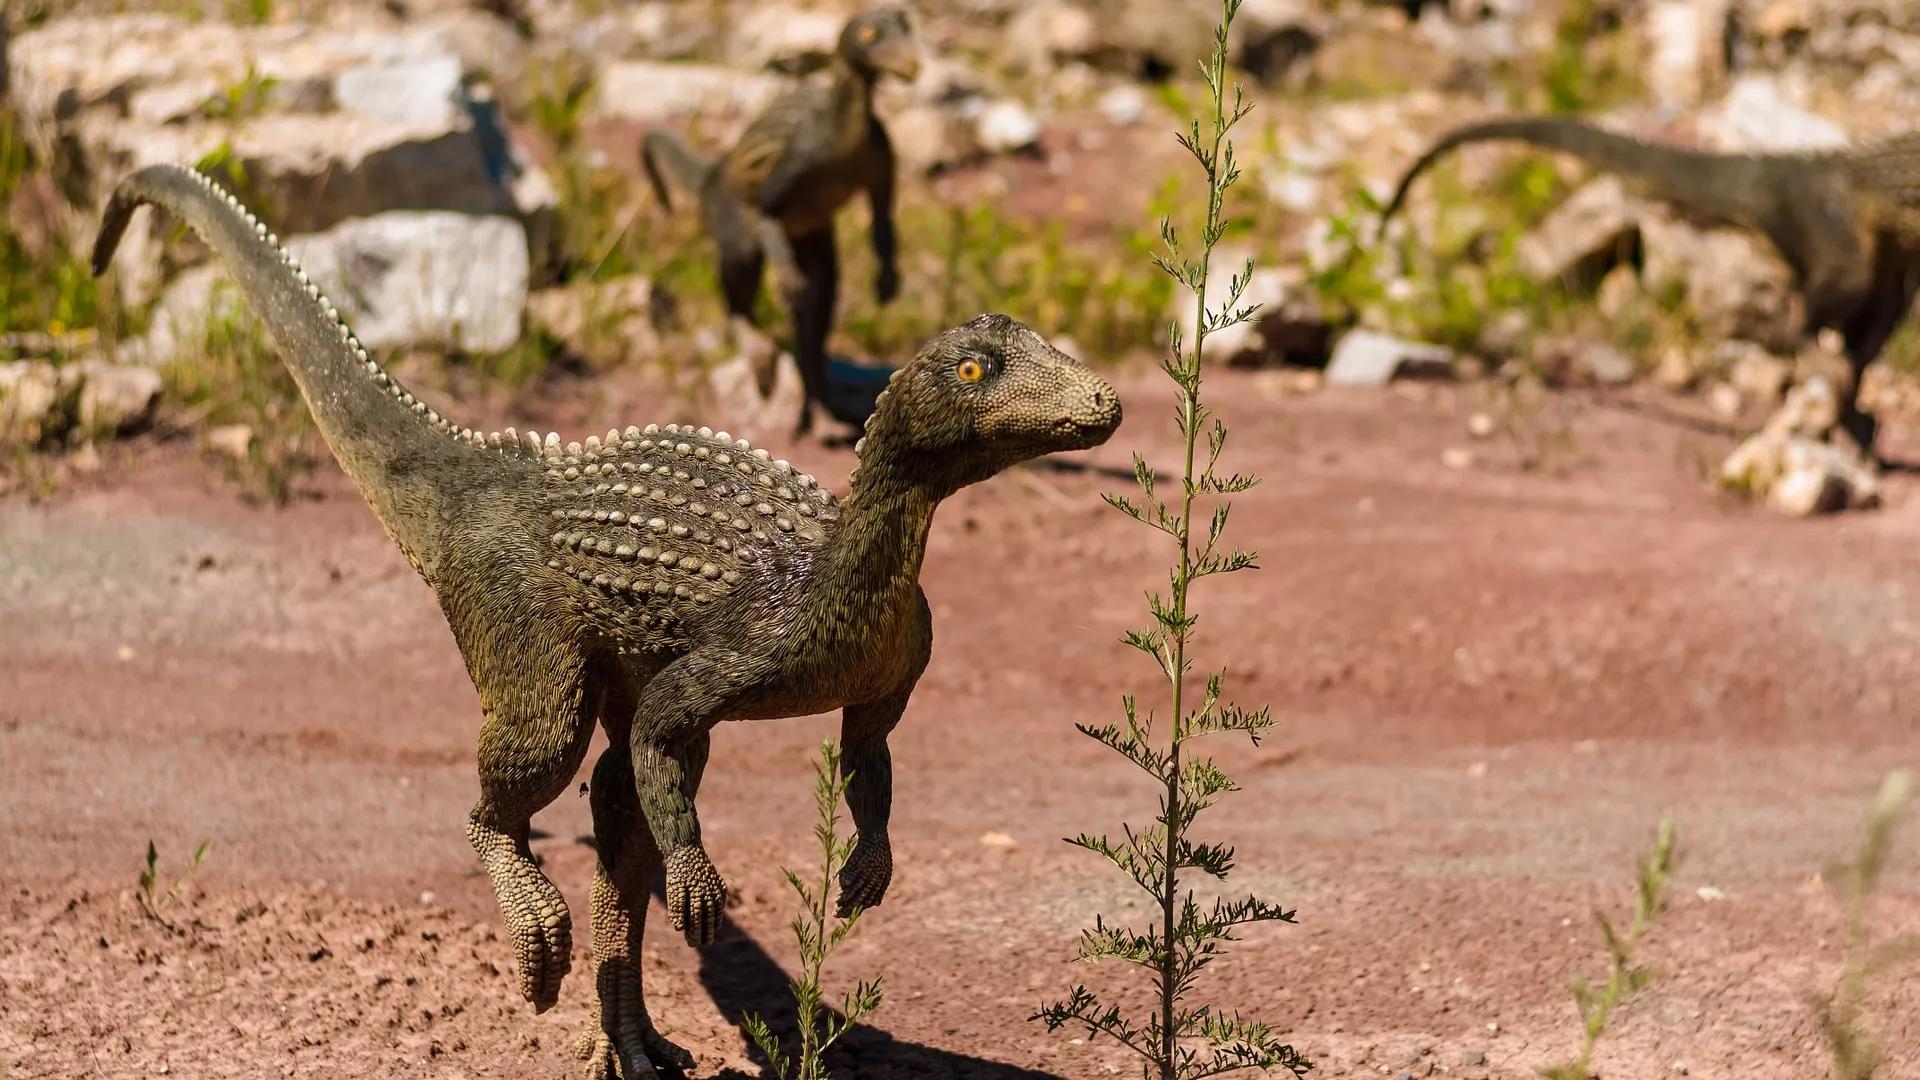 Researchers Discover First of Its Kind Armored Dinosaur Fossils in Argentina